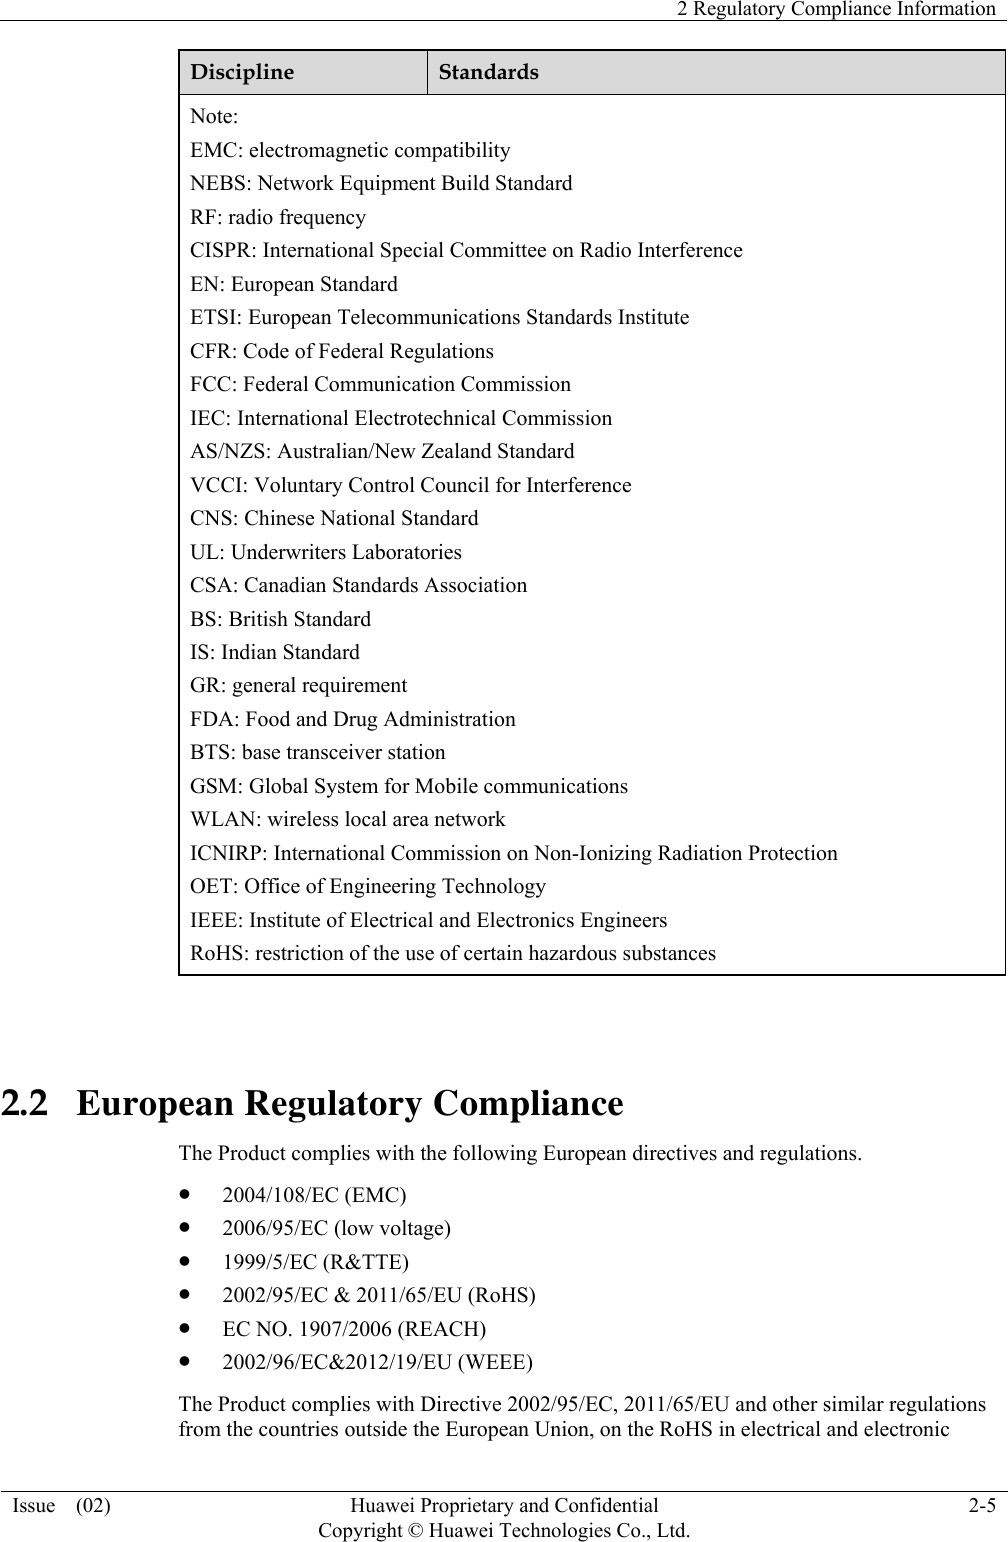    2 Regulatory Compliance Information Issue  (02)  Huawei Proprietary and Confidential     Copyright © Huawei Technologies Co., Ltd.2-5 Discipline  Standards Note: EMC: electromagnetic compatibility NEBS: Network Equipment Build Standard RF: radio frequency CISPR: International Special Committee on Radio Interference EN: European Standard ETSI: European Telecommunications Standards Institute CFR: Code of Federal Regulations FCC: Federal Communication Commission IEC: International Electrotechnical Commission AS/NZS: Australian/New Zealand Standard VCCI: Voluntary Control Council for Interference CNS: Chinese National Standard UL: Underwriters Laboratories CSA: Canadian Standards Association BS: British Standard IS: Indian Standard GR: general requirement FDA: Food and Drug Administration BTS: base transceiver station GSM: Global System for Mobile communications WLAN: wireless local area network ICNIRP: International Commission on Non-Ionizing Radiation Protection OET: Office of Engineering Technology IEEE: Institute of Electrical and Electronics Engineers RoHS: restriction of the use of certain hazardous substances  2.2   European Regulatory Compliance The Product complies with the following European directives and regulations. z 2004/108/EC (EMC) z 2006/95/EC (low voltage) z 1999/5/EC (R&amp;TTE) z 2002/95/EC &amp; 2011/65/EU (RoHS) z EC NO. 1907/2006 (REACH) z 2002/96/EC&amp;2012/19/EU (WEEE) The Product complies with Directive 2002/95/EC, 2011/65/EU and other similar regulations from the countries outside the European Union, on the RoHS in electrical and electronic 